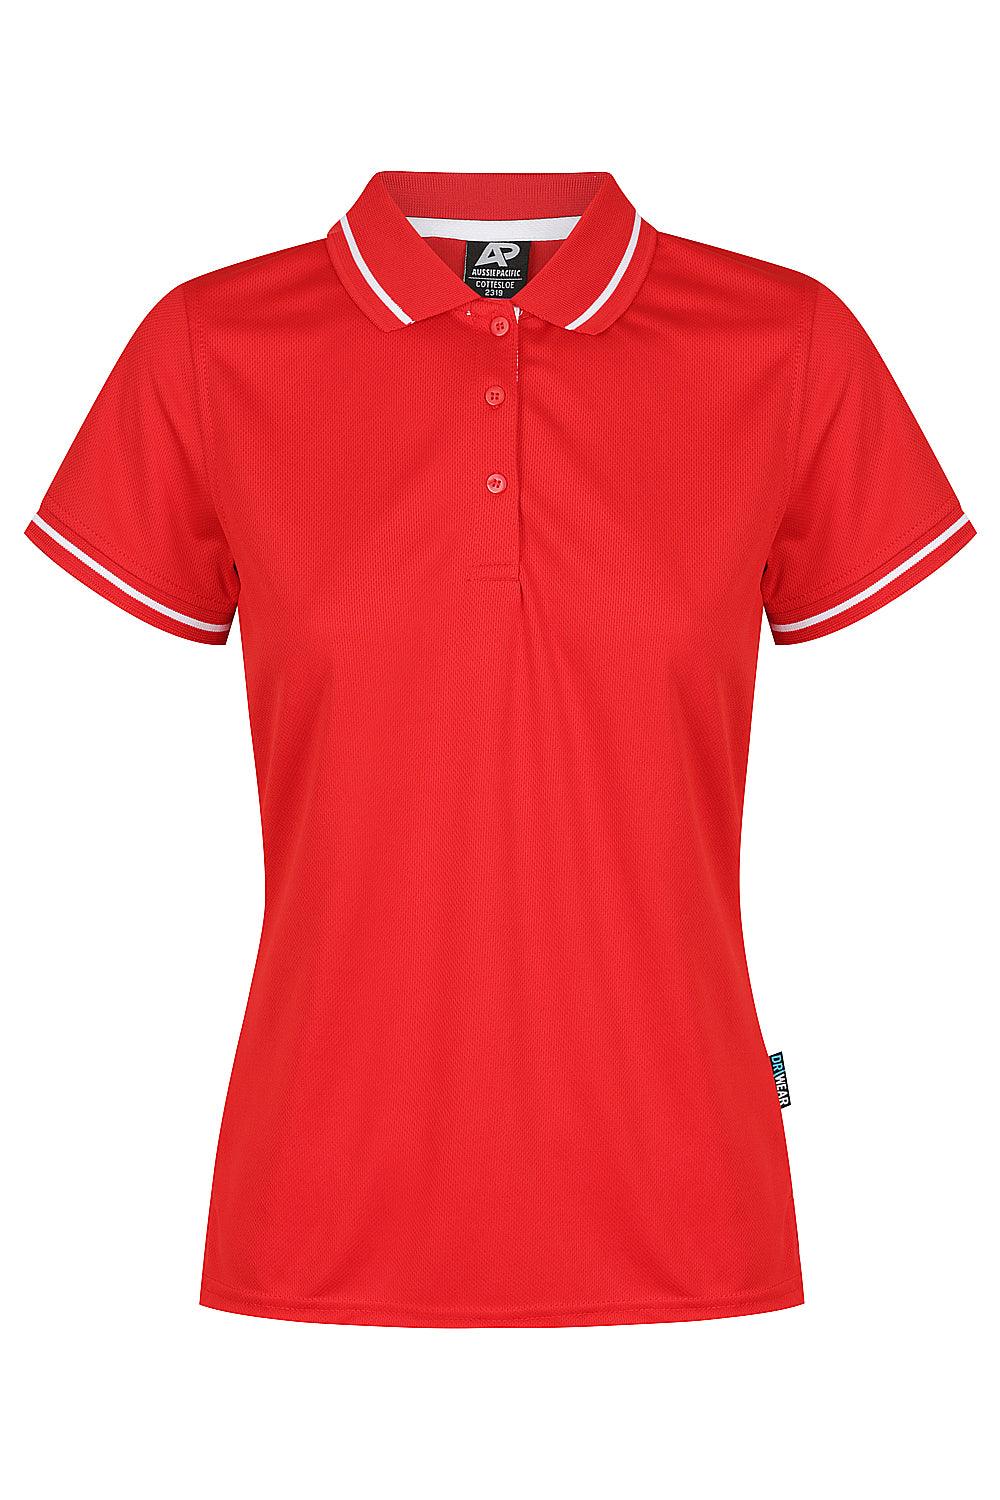 LADIES CUSTOM PRINTED COTTESLOE POLO  Red/White